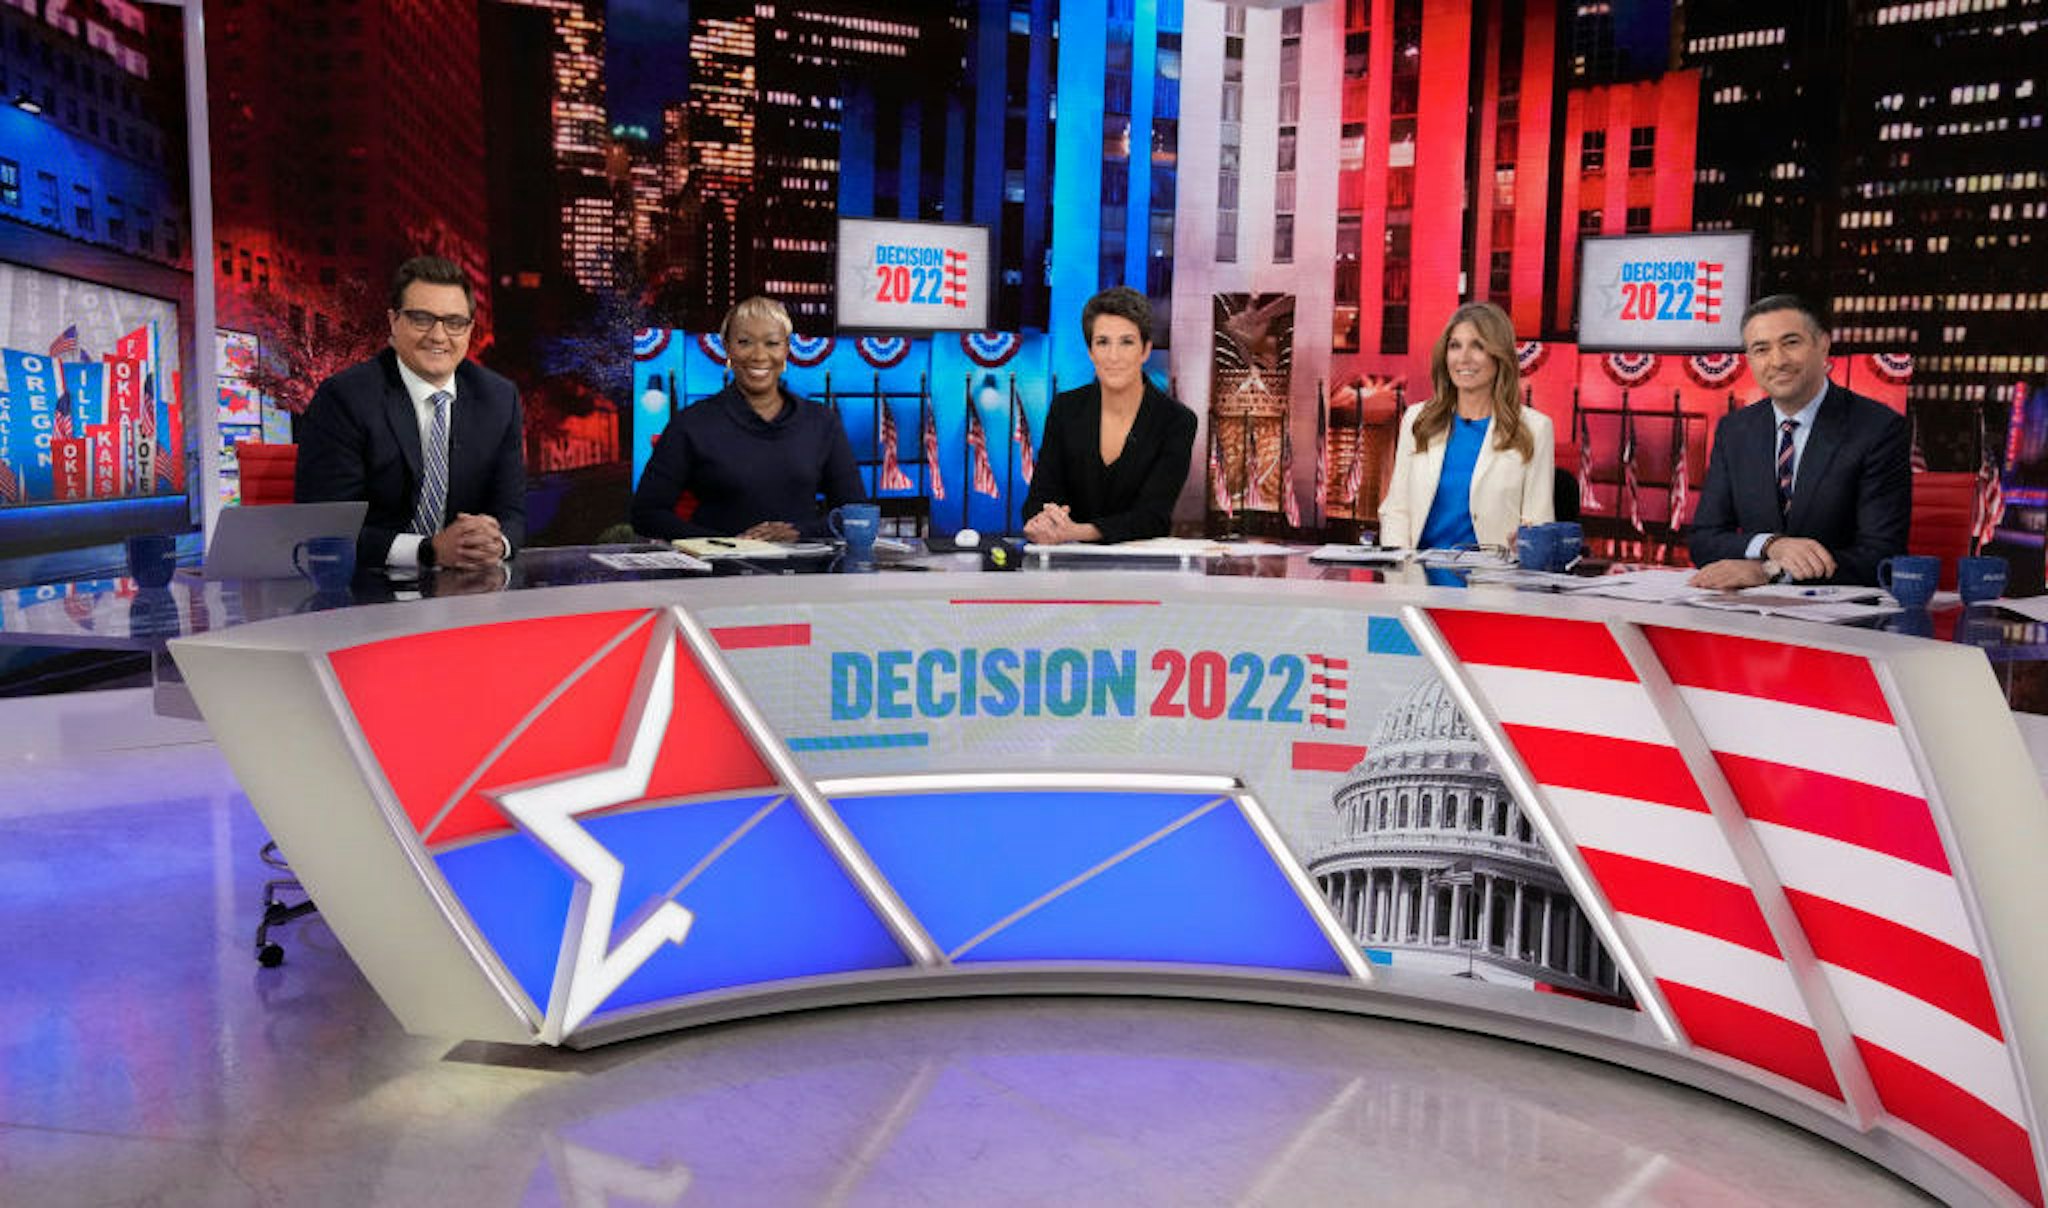 2022 MSNBC ELECTION COVERAGE -- 2022 Midterms Election Coverage -- Pictured: (l-r) Chris Hayes, Joy Reid, Rachel Maddow, Nicolle Wallace, Ari Melber in Studio 3A at Rockefeller Center on Tuesday, November 8, 2022 -- (Photo by: Virginia Sherwood/MSNBC via Getty Images)